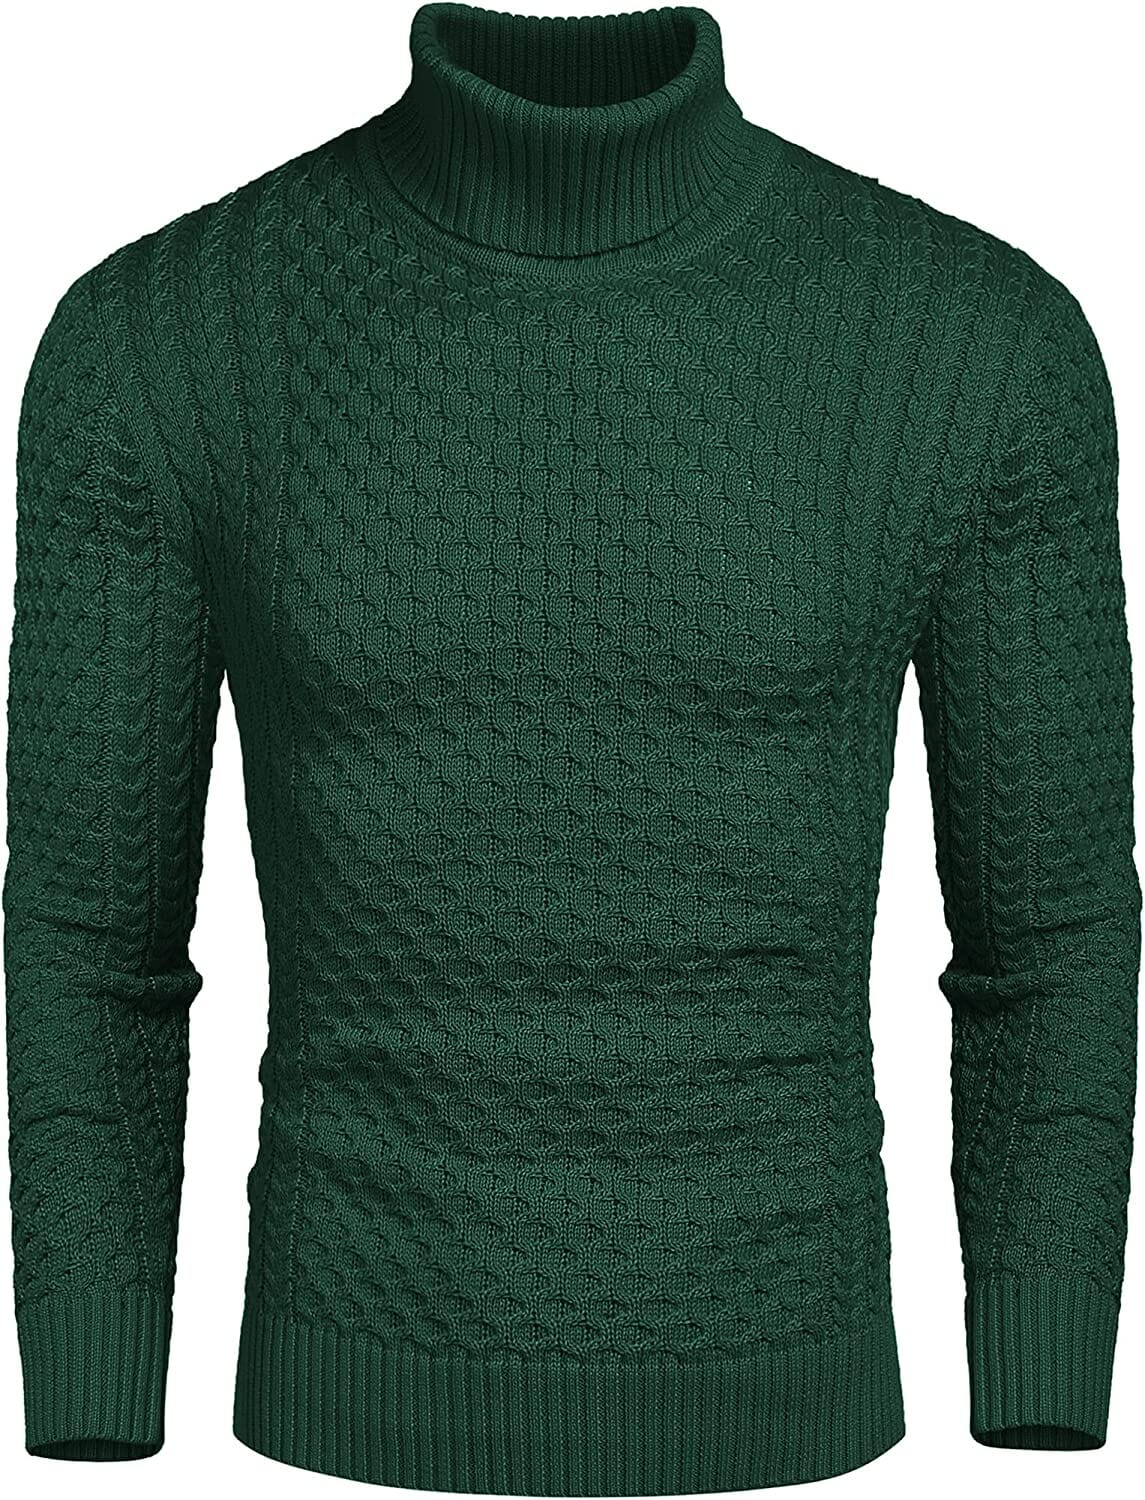 Slim Fit Turtleneck Knitted Twisted Pullover Sweaters (US Only) Sweaters Coofandy's 